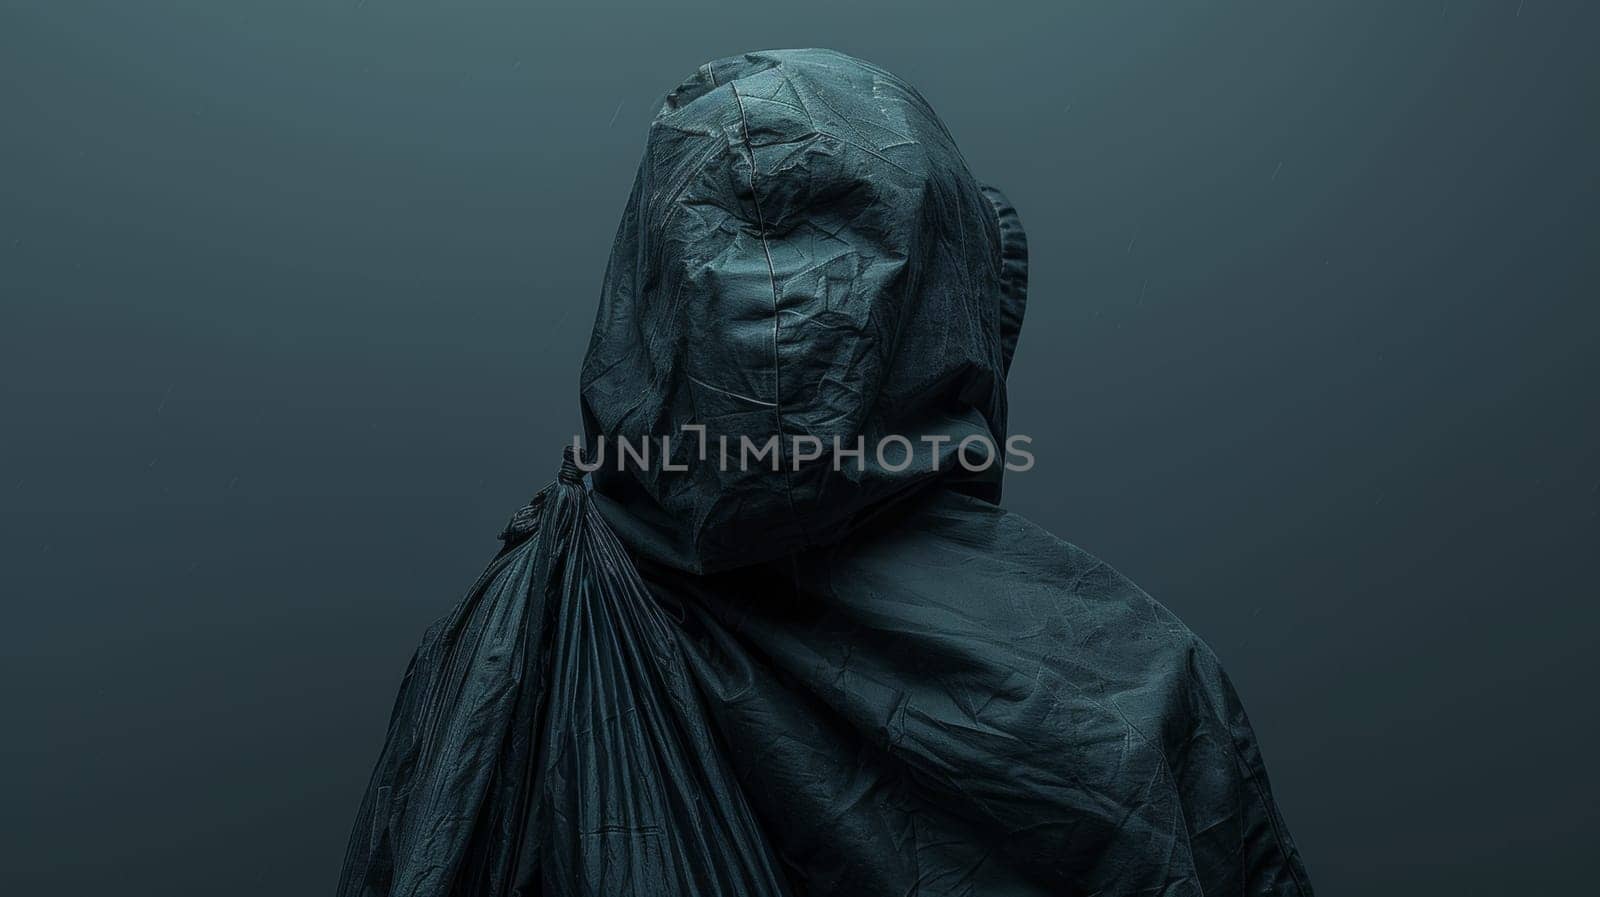 A person wearing a black cloak with an umbrella on their head, AI by starush